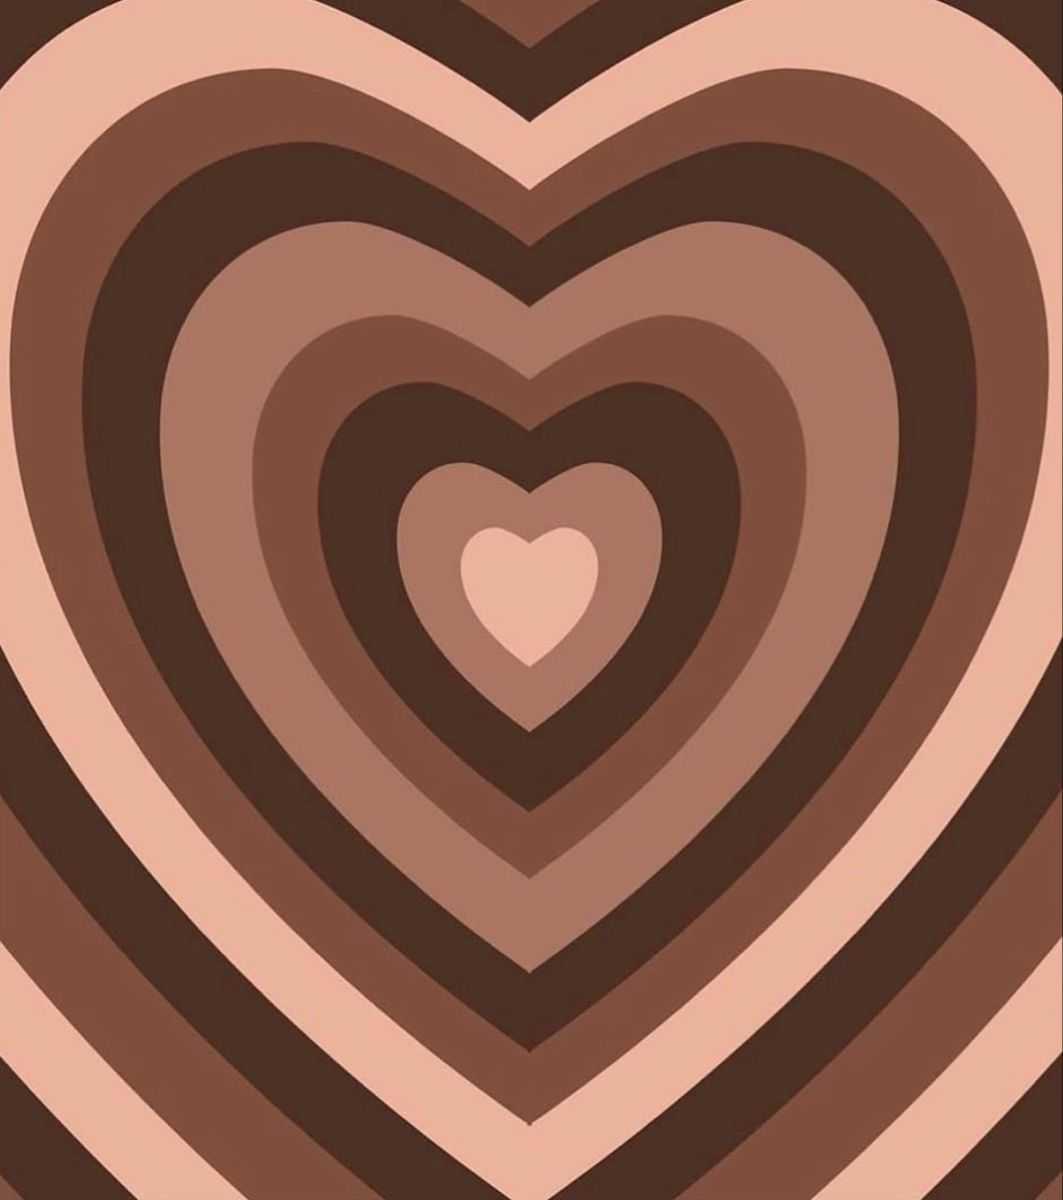 A brown and white heart pattern - Heart